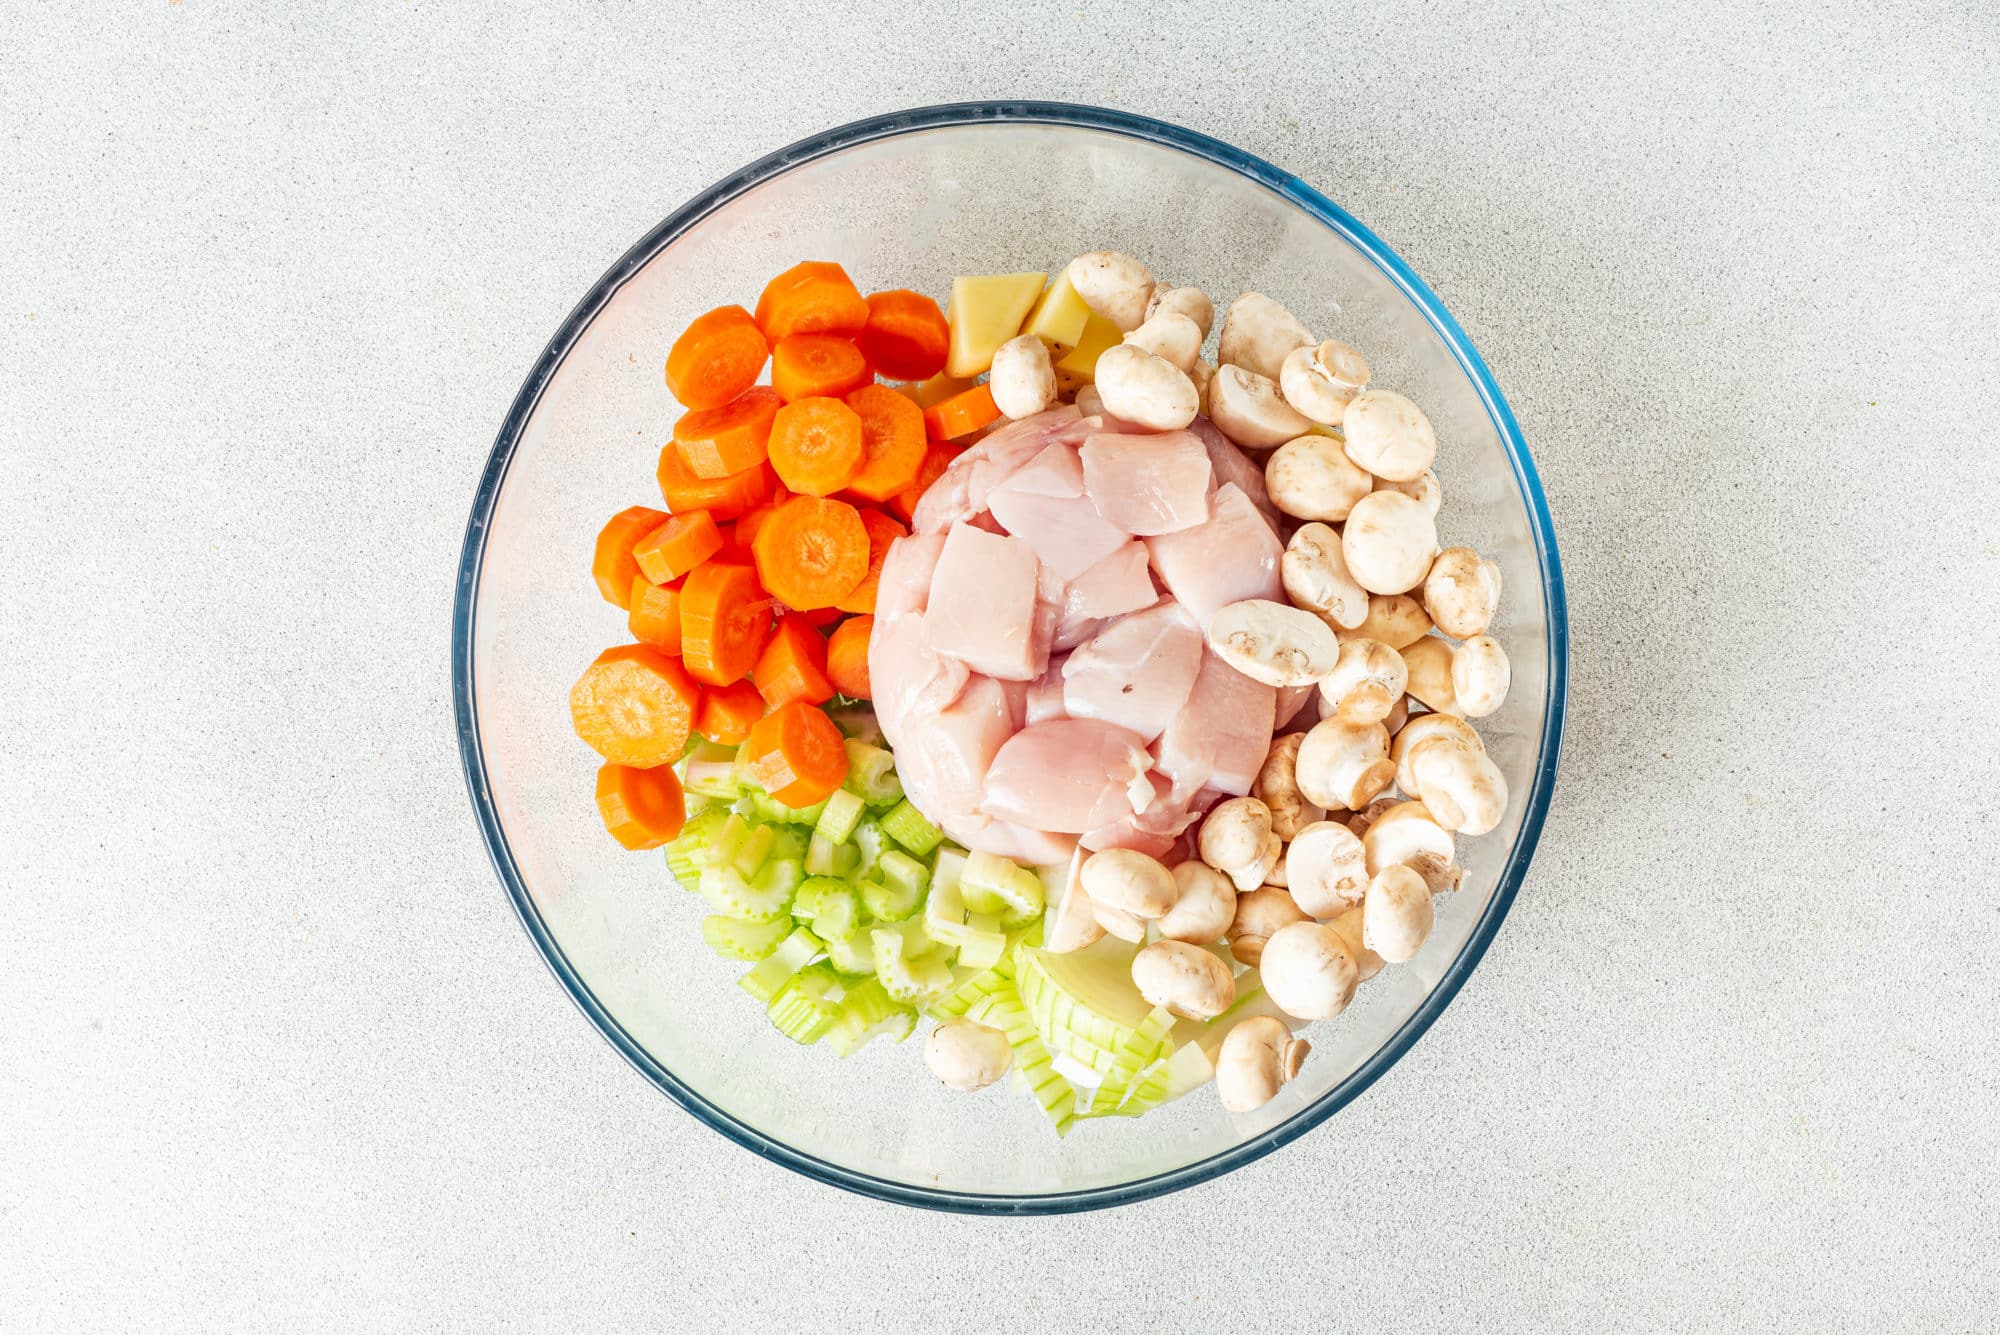 vegetables-and-raw-chicken-chopped-in-a-glass-bowl